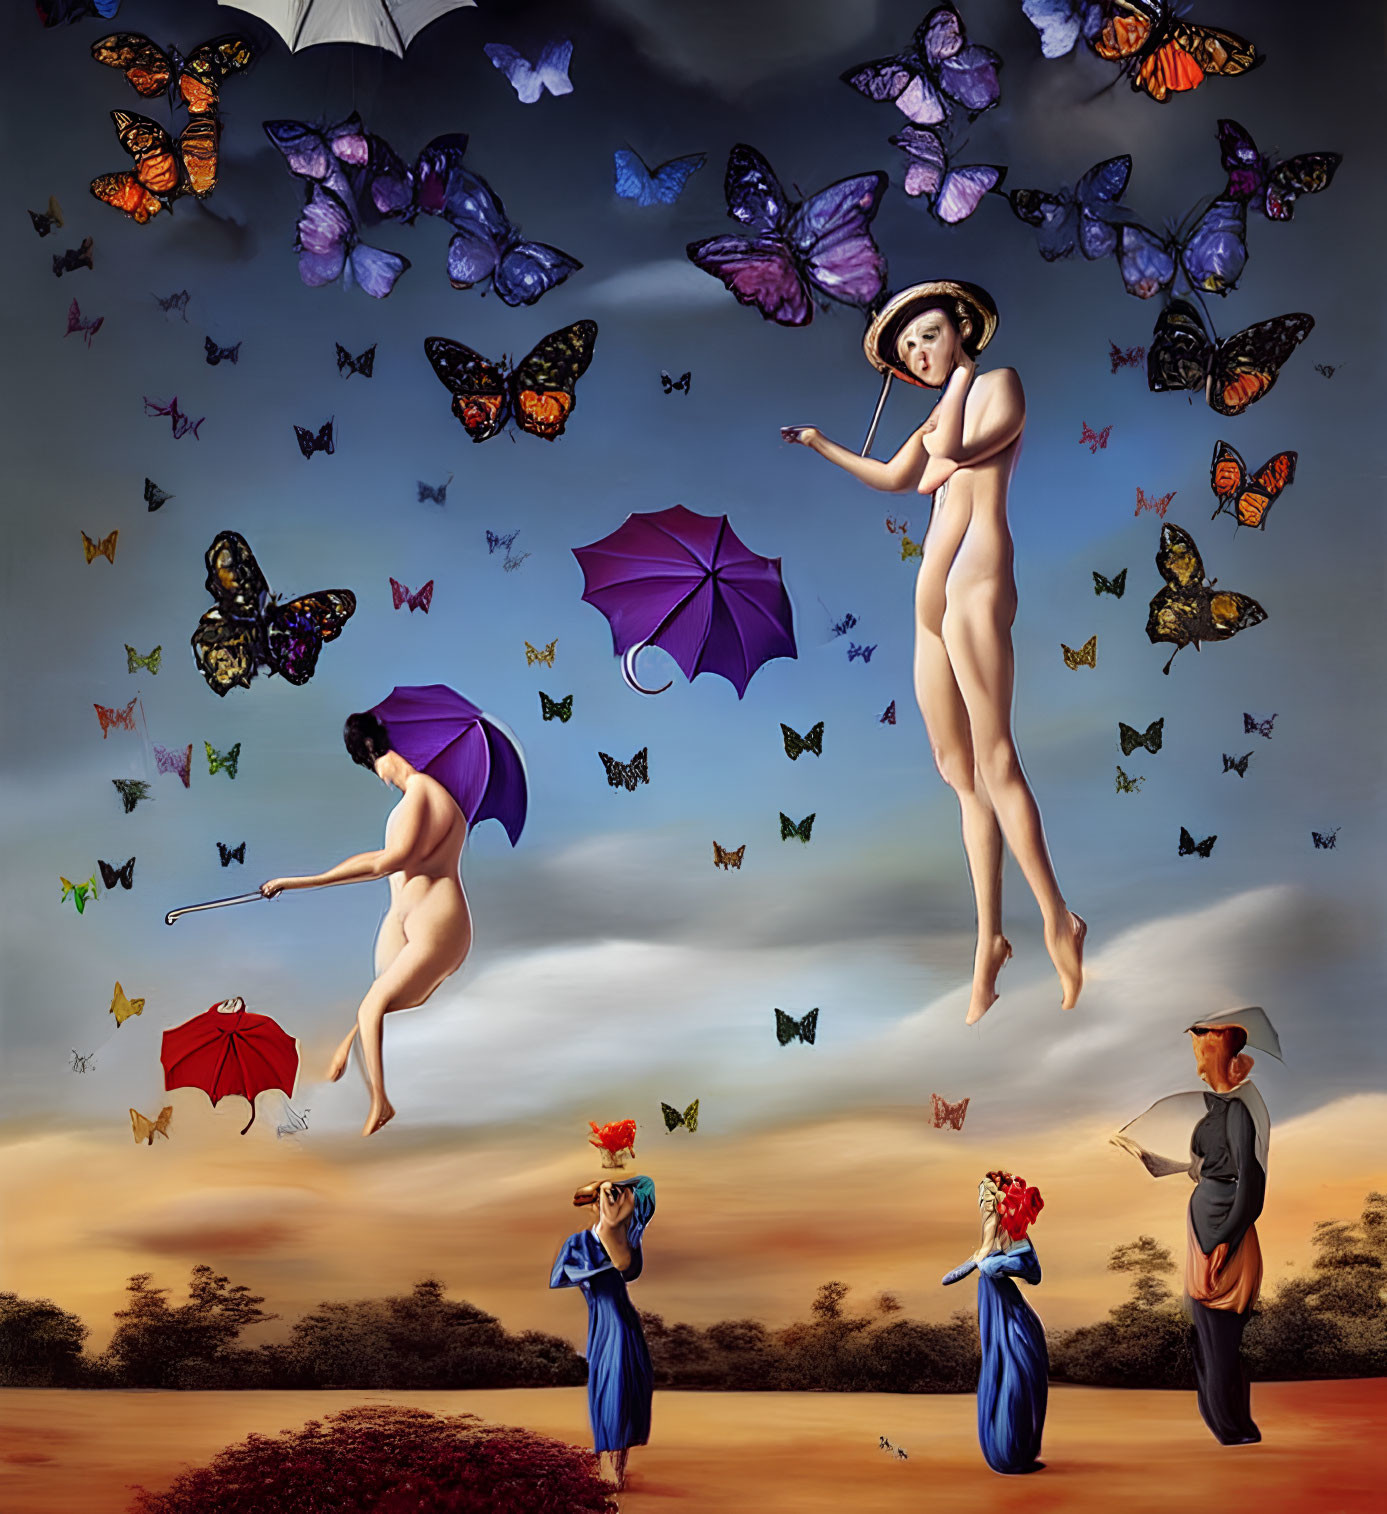 Surreal painting with floating nude figures and flower-headed individuals